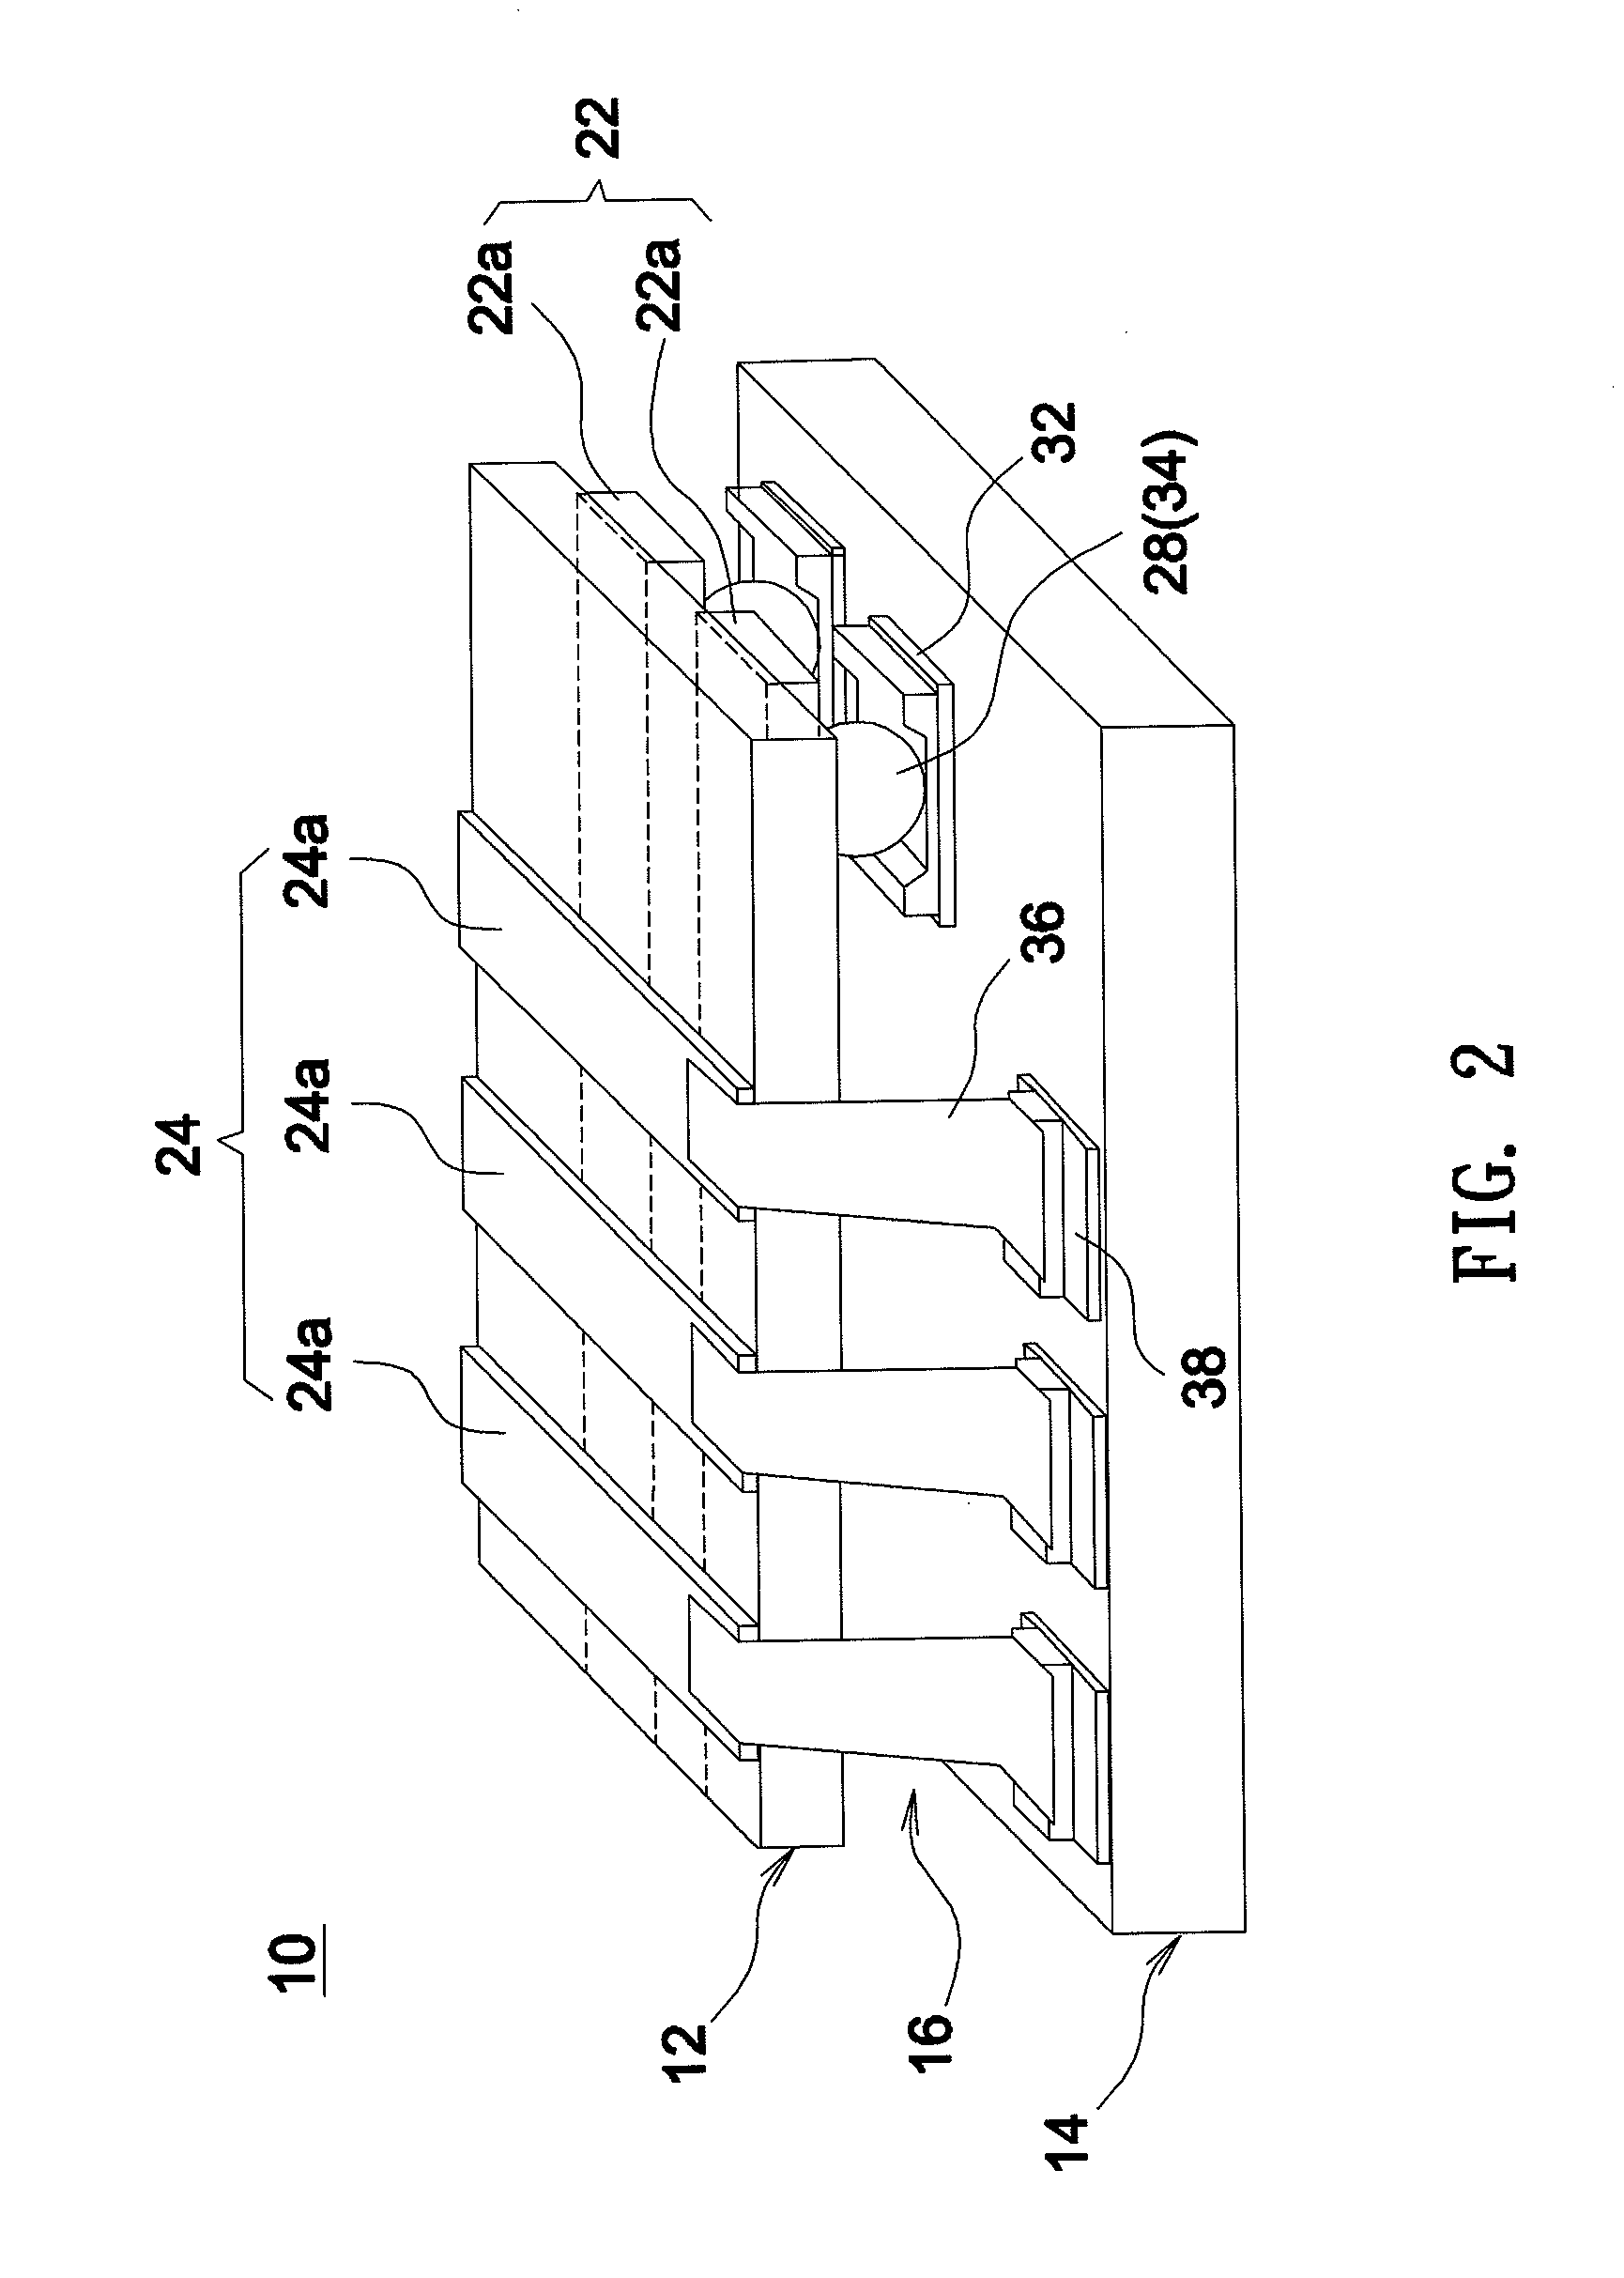 Touch-sensing display device